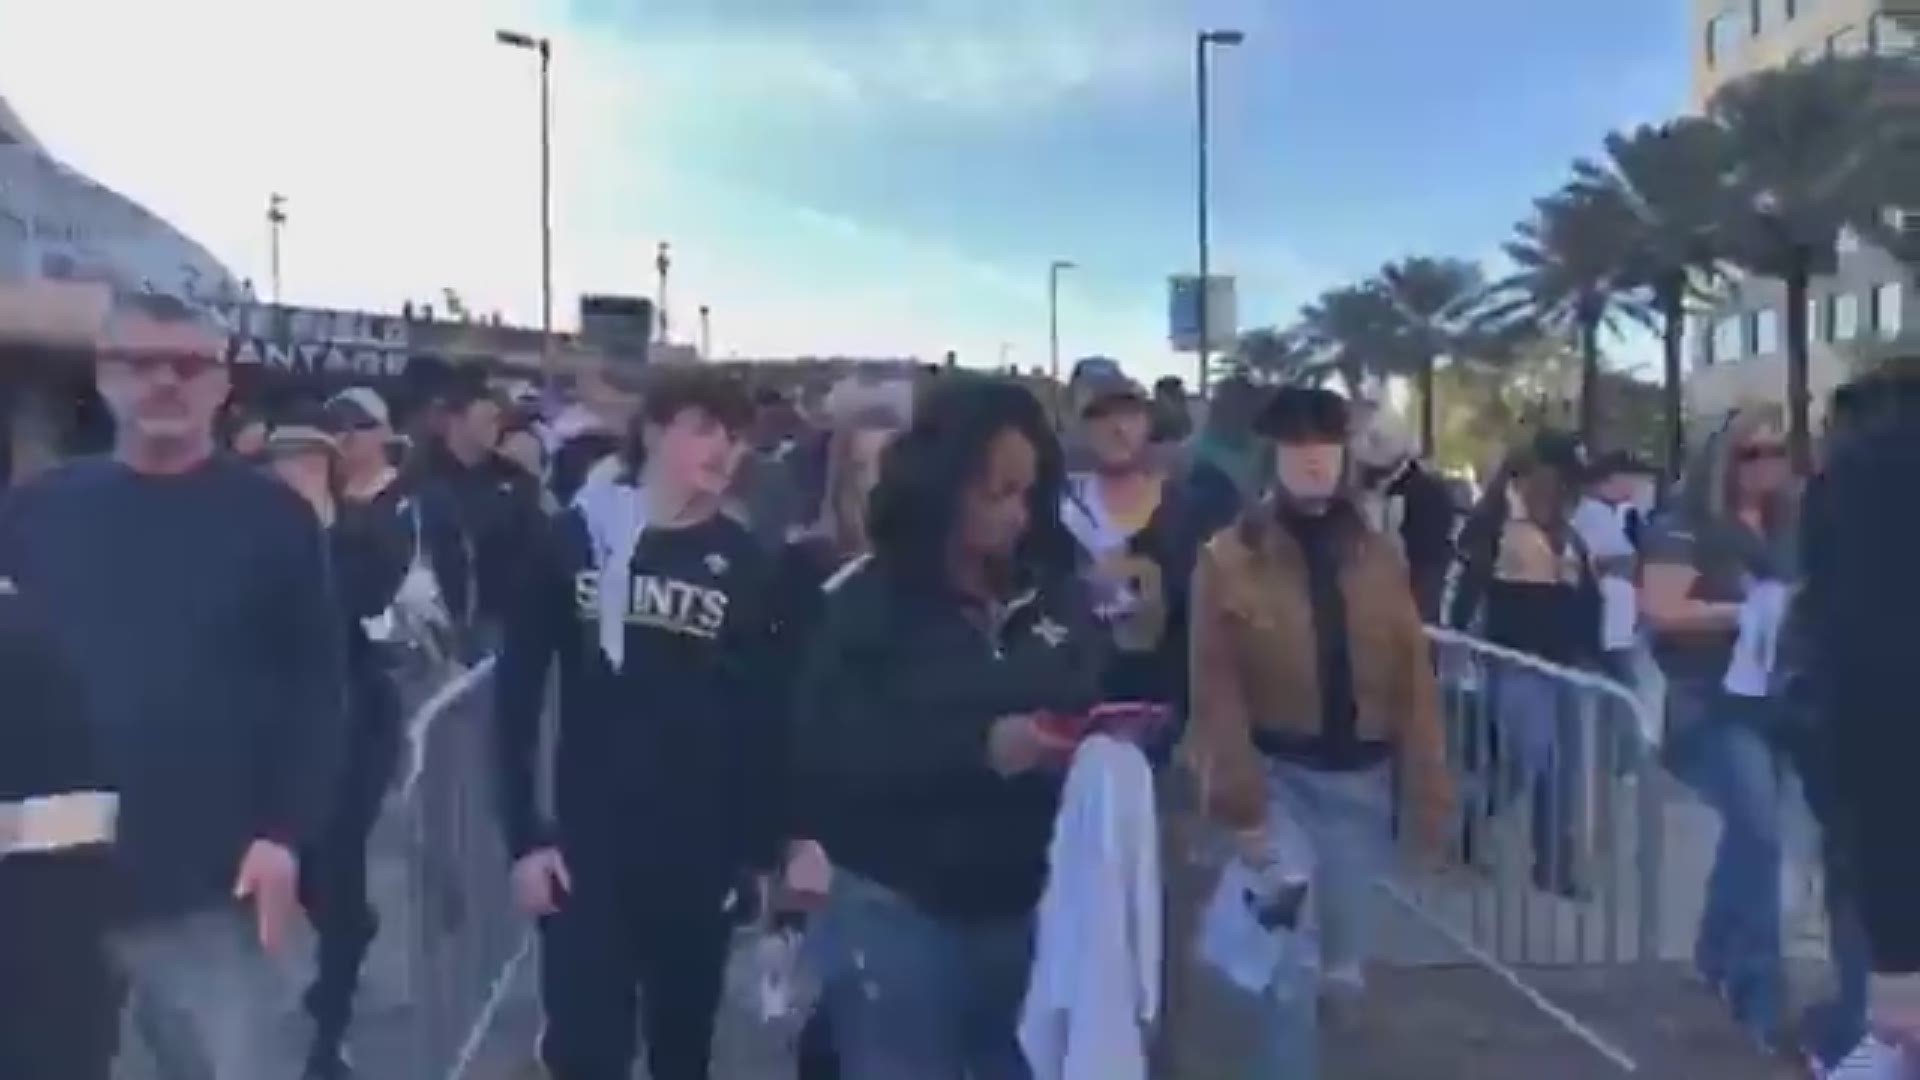 WWL-TV's Erika Ferrando spoke to some fans after the Saints won 34-31 thanks to a last-minute field goal score kicked by Wil Lutz.